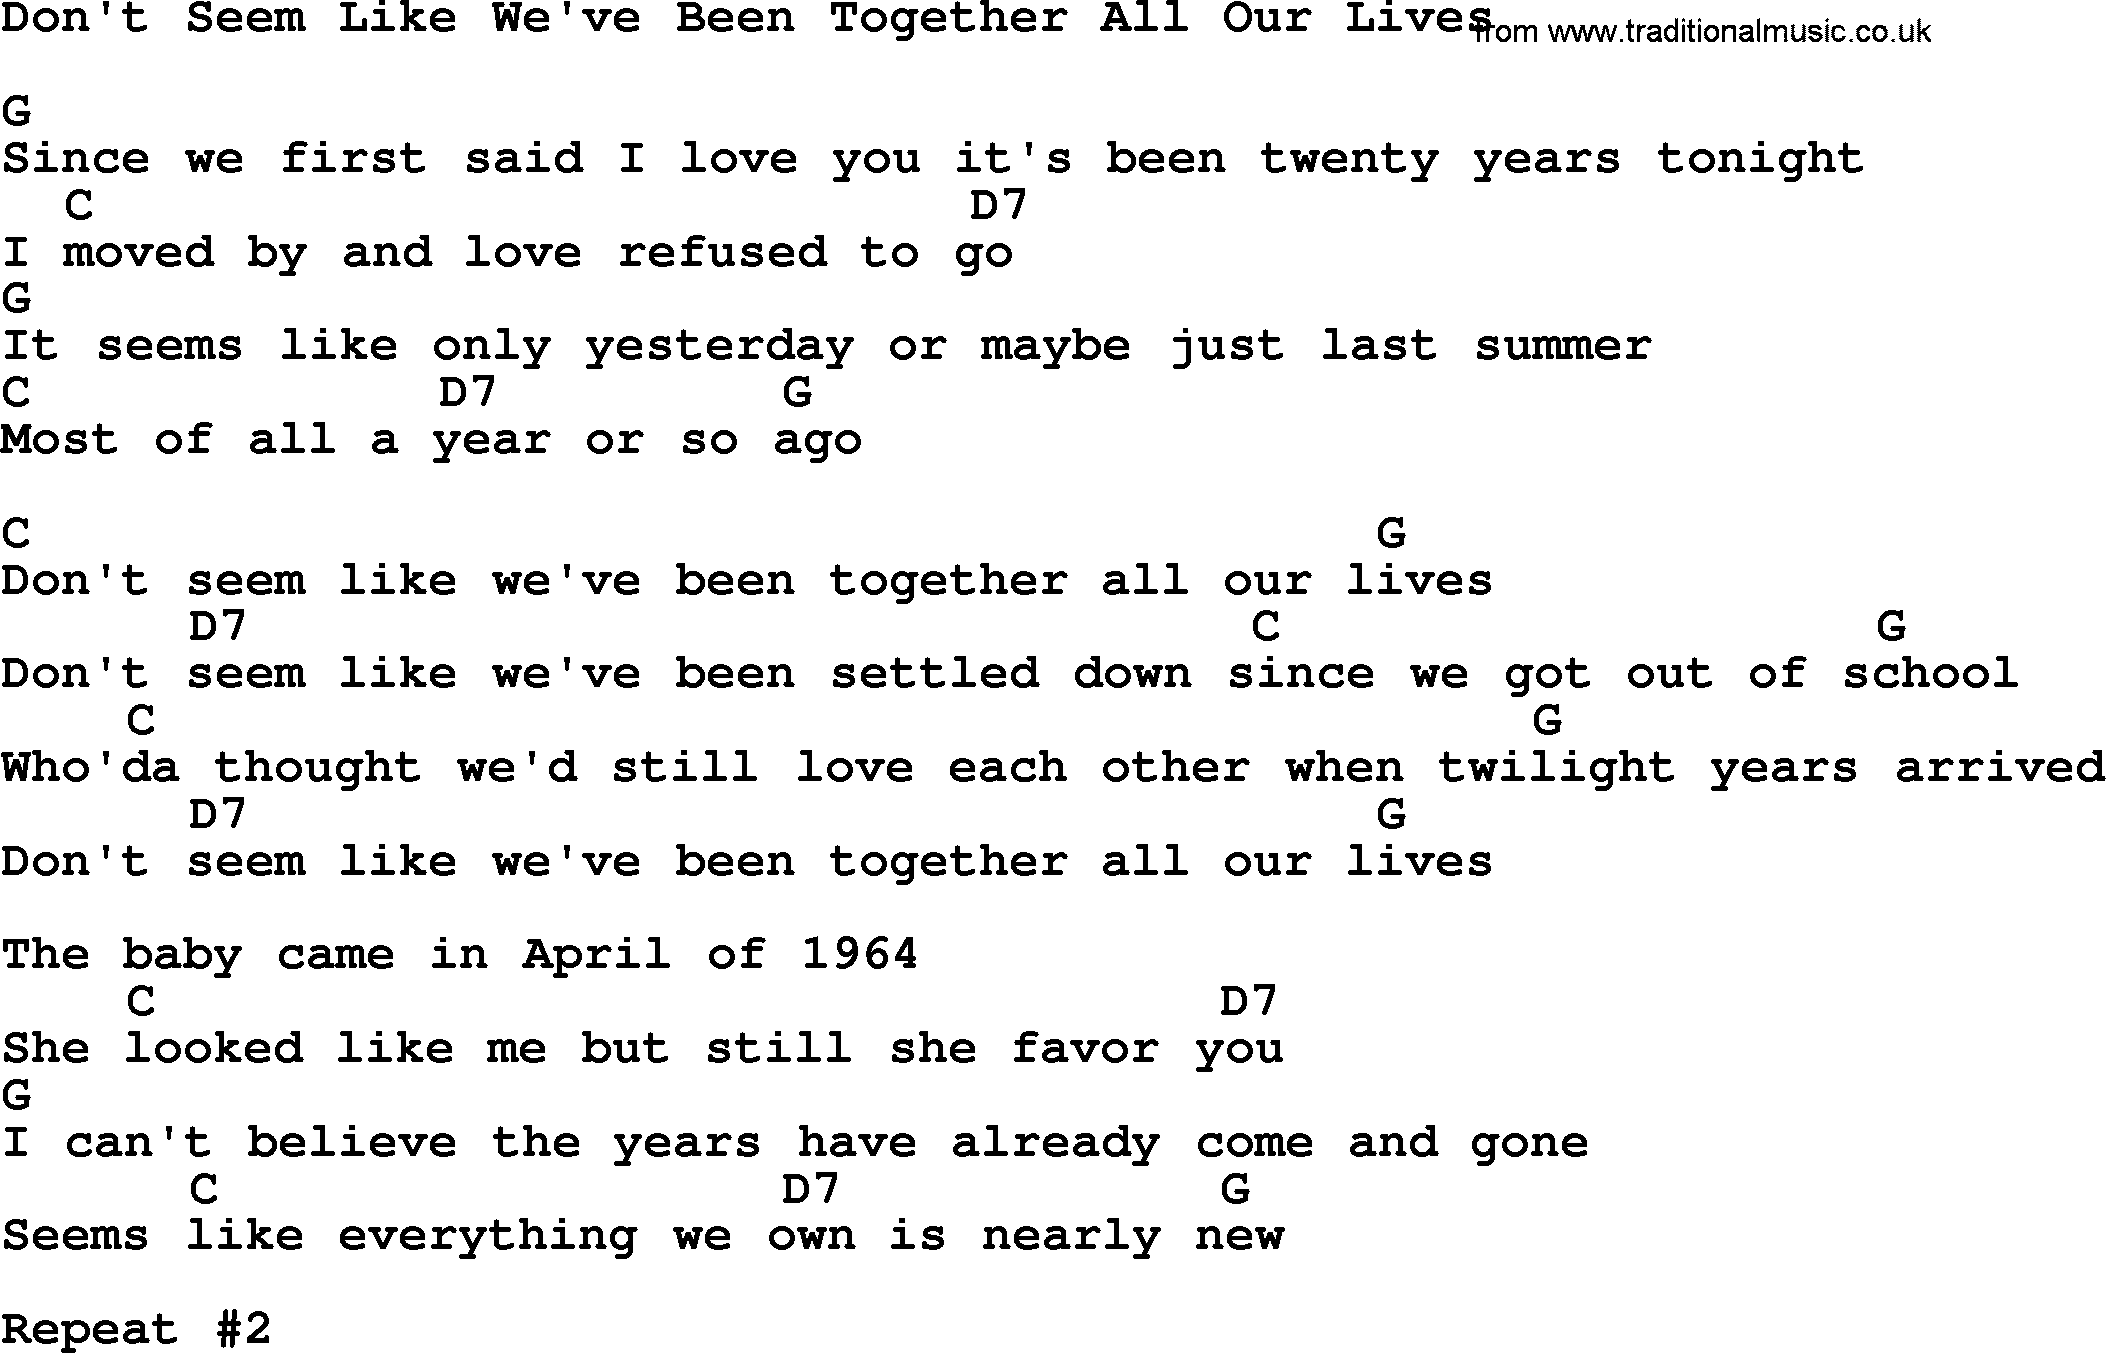 Merle Haggard song: Don't Seem Like We've Been Together All Our Lives, lyrics and chords